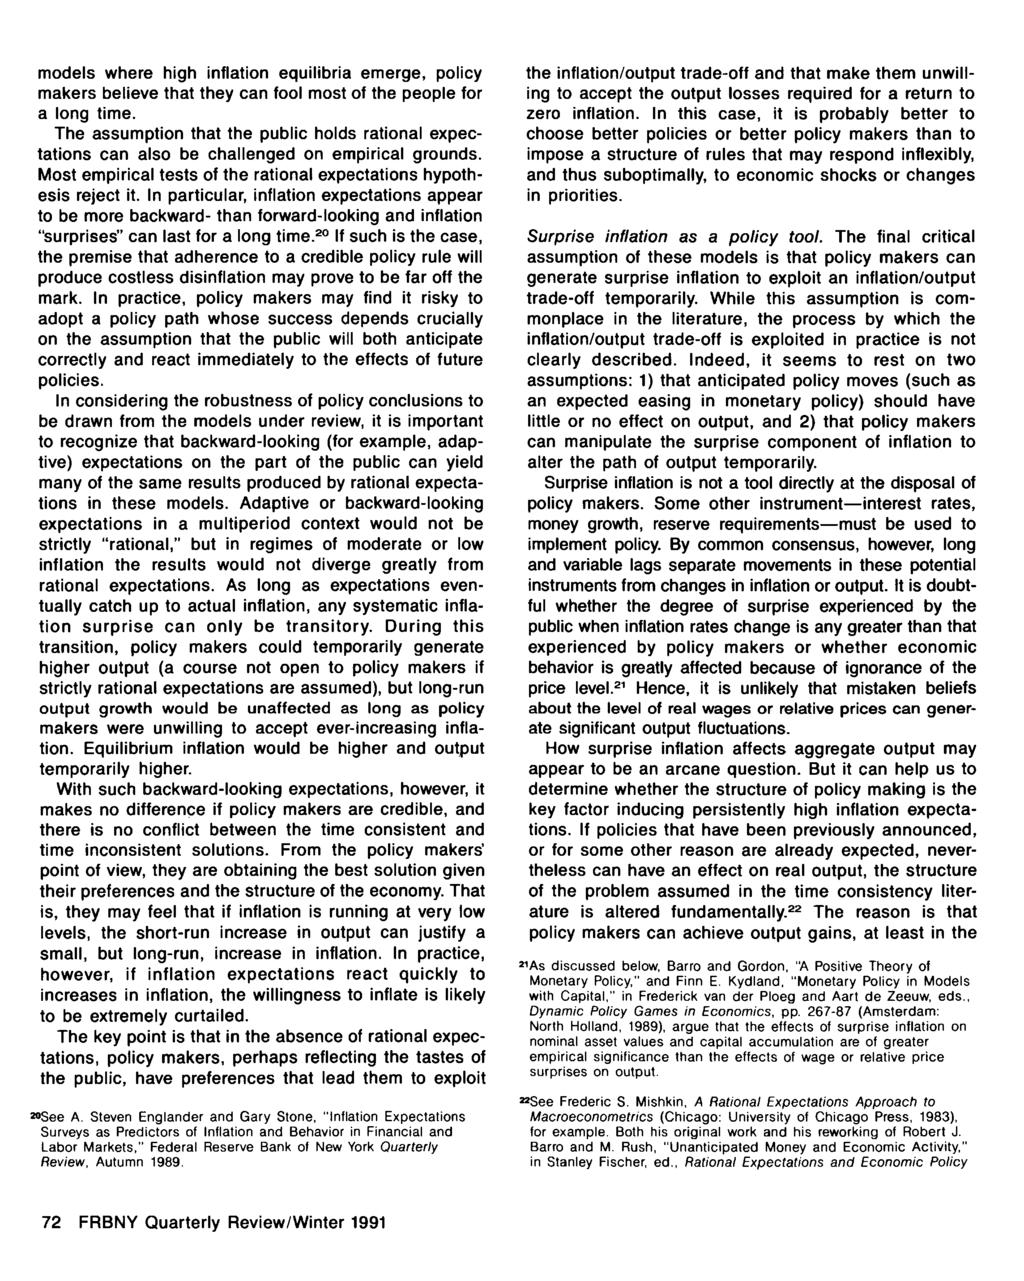 72 FRBNY Quarterly Review/Winter 1991 Winter 1990-1991 models where high inflation equilibria emerge, policy makers believe that they can fool most of the people for a long time.